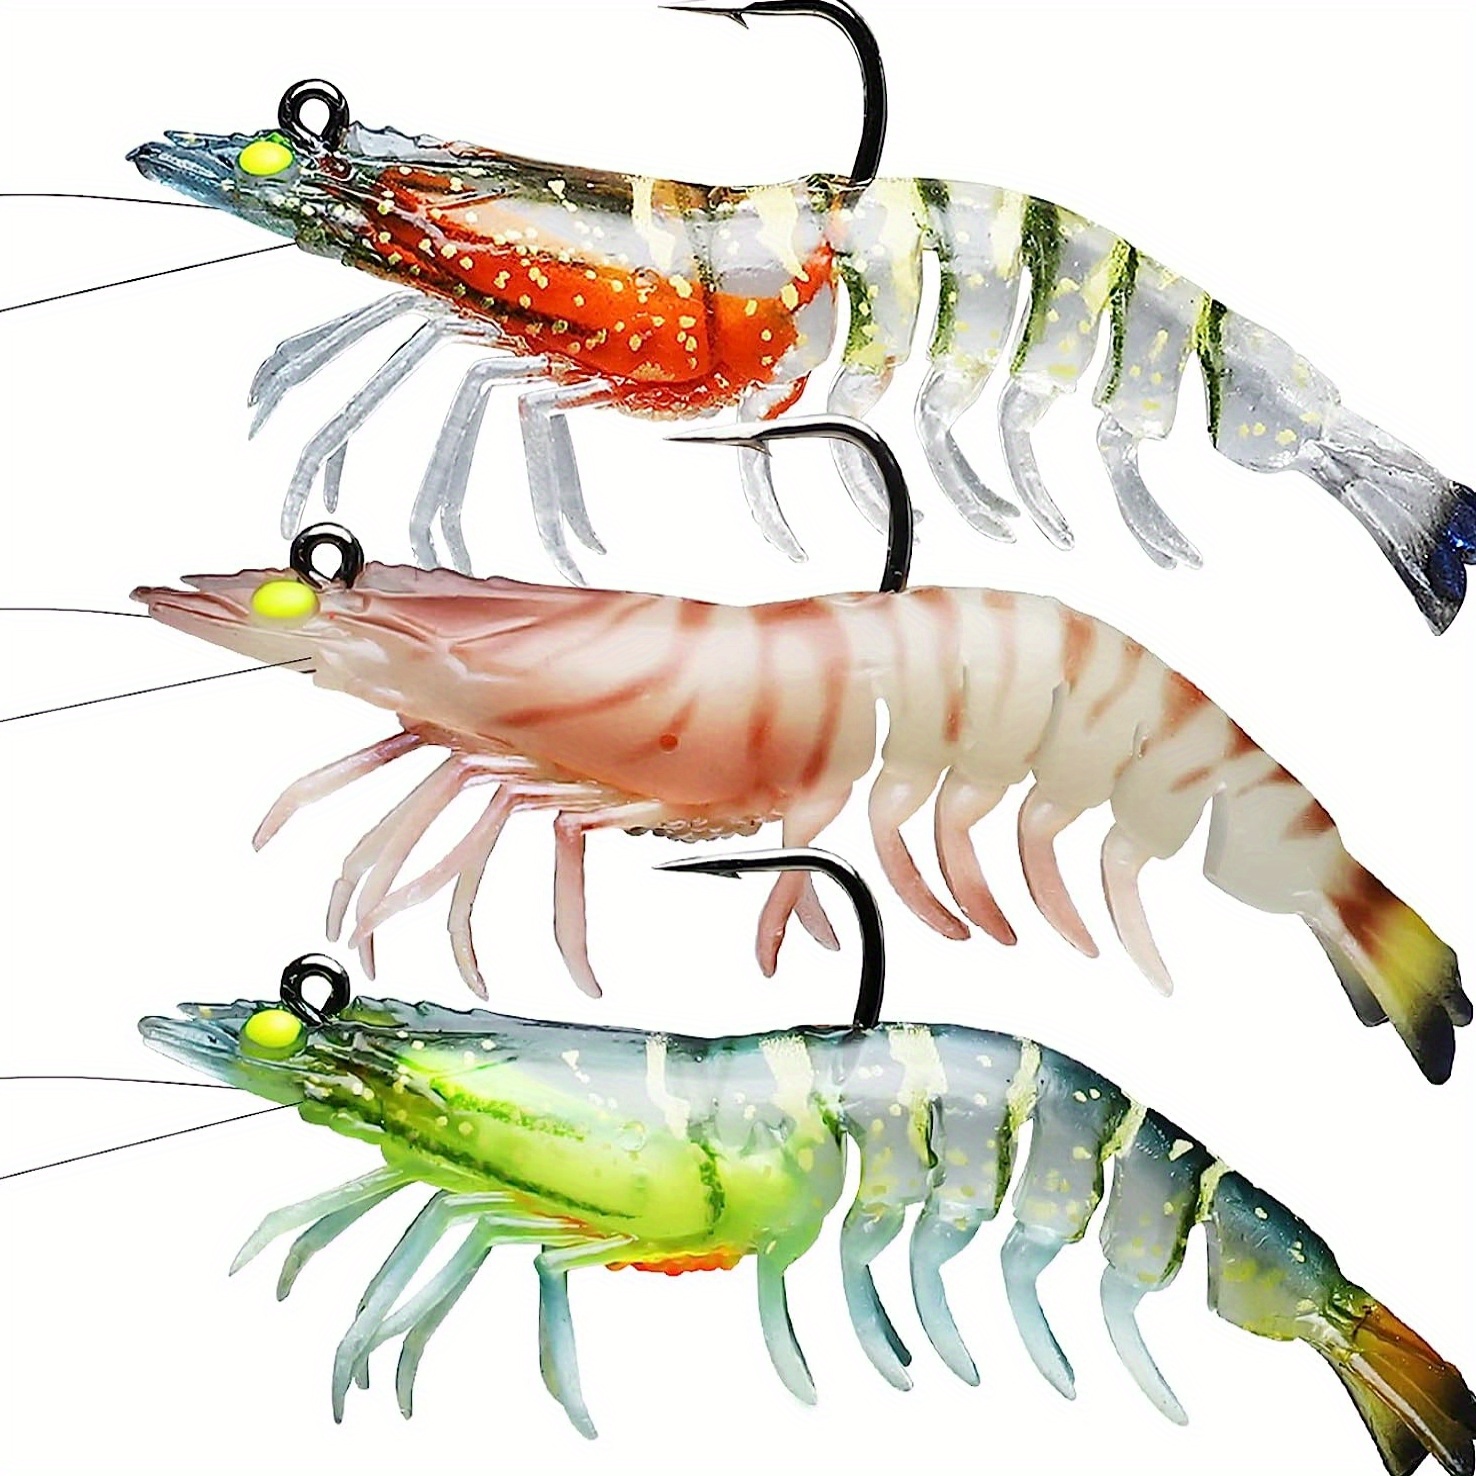 

Pre-rigged Fishing Jigs, 1:50 Super Durable Tpe Fishing Lures, Well-made Lifelike Shrimp Crayfish Shad Swimbait, Weedless Lure For Bass Trout Walleye, Saltwater Fishing Gear, Keep Separately!